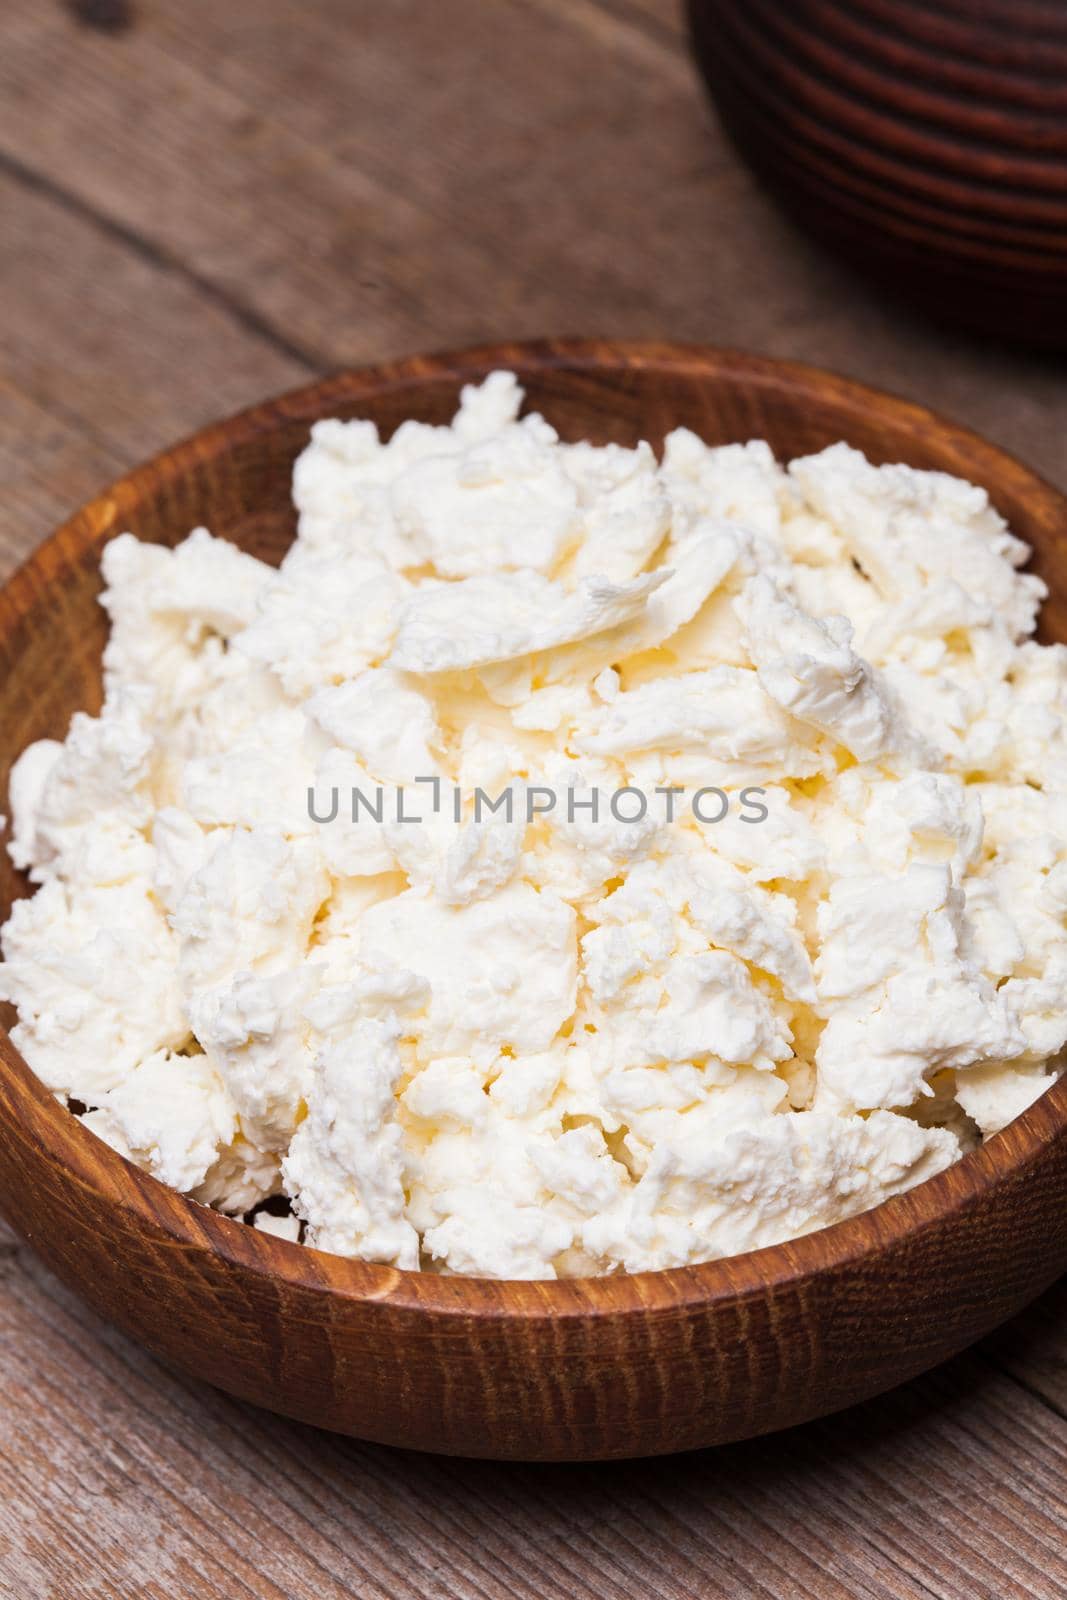 cottage cheese or curd in a wooden bowl